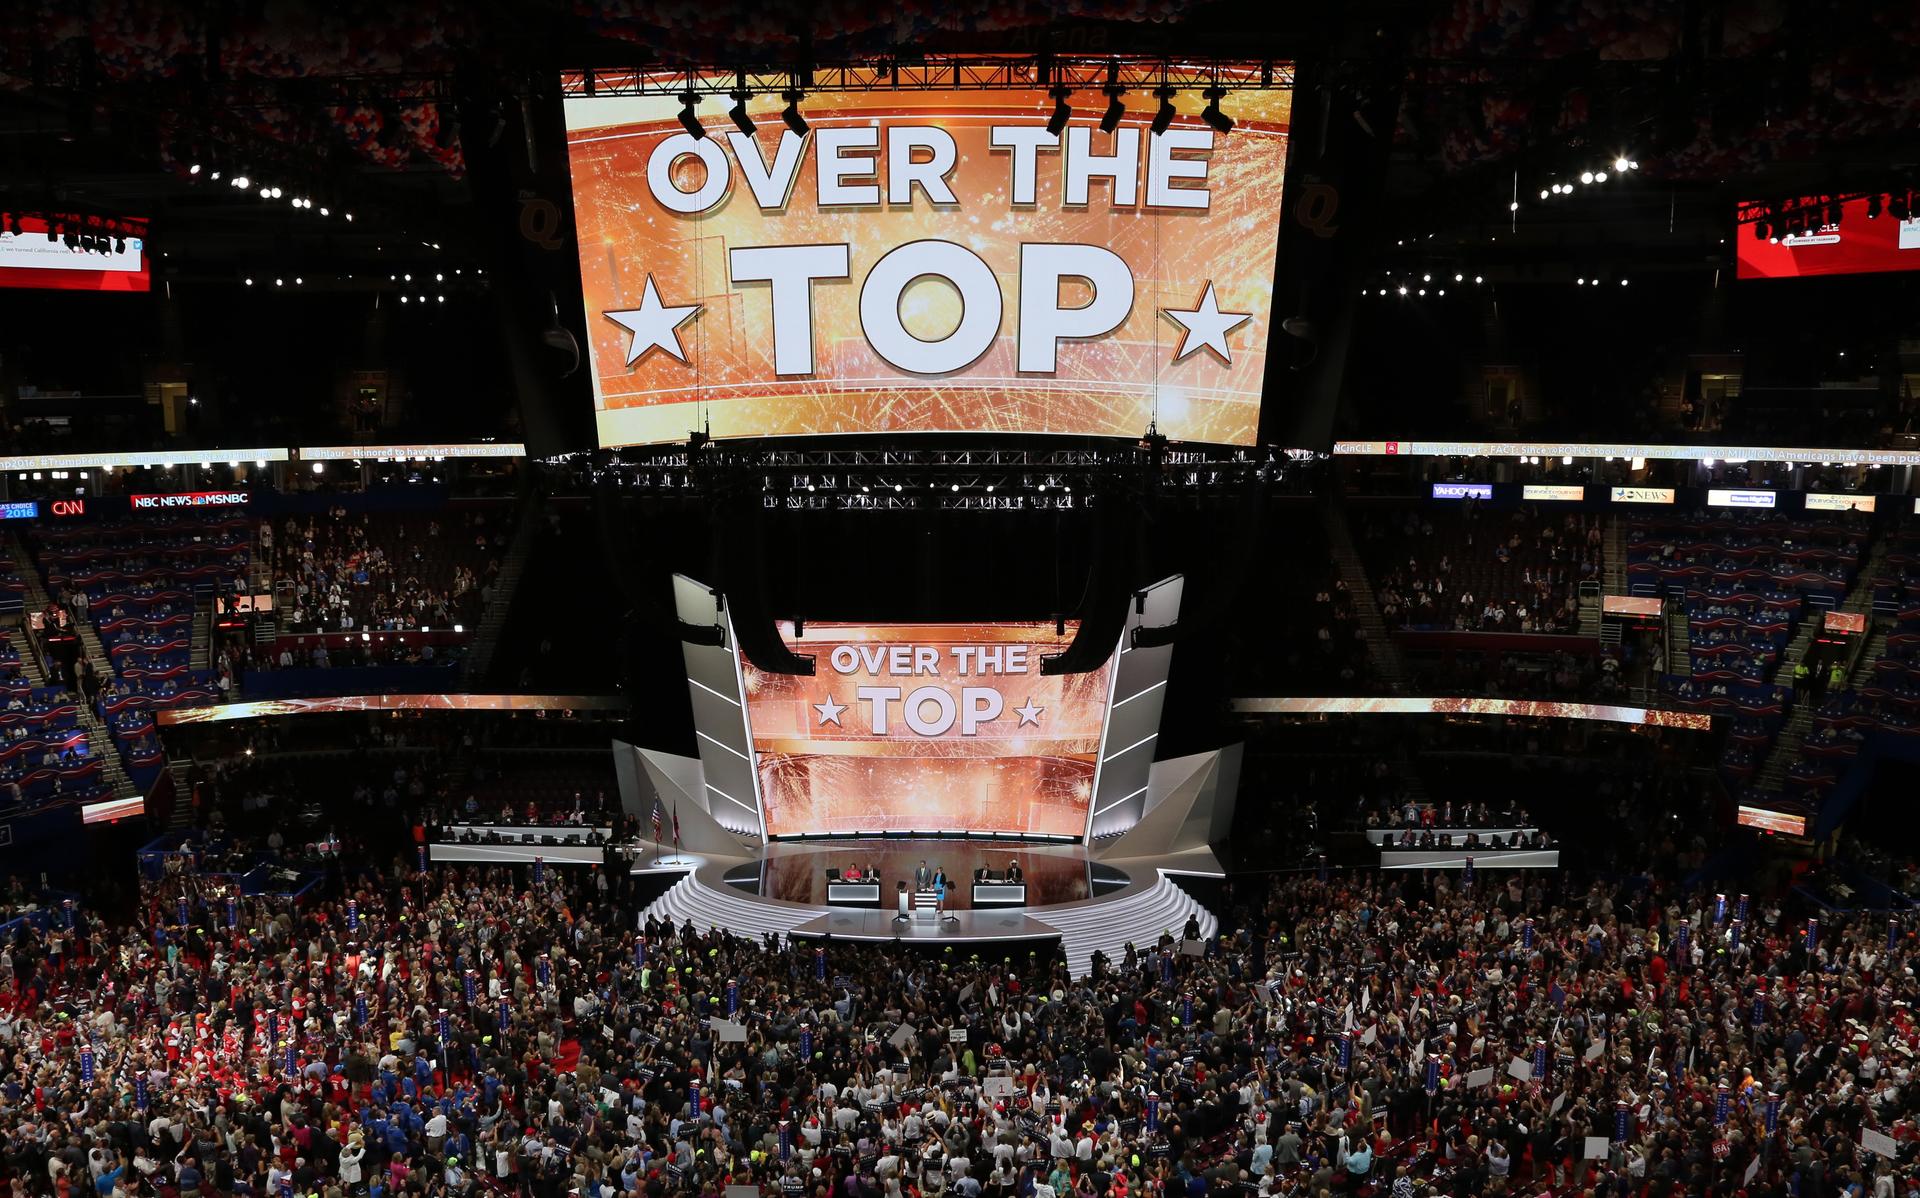 The New York delegation puts Donald Trump over the top to win the 2016 Republican presidential nomination.